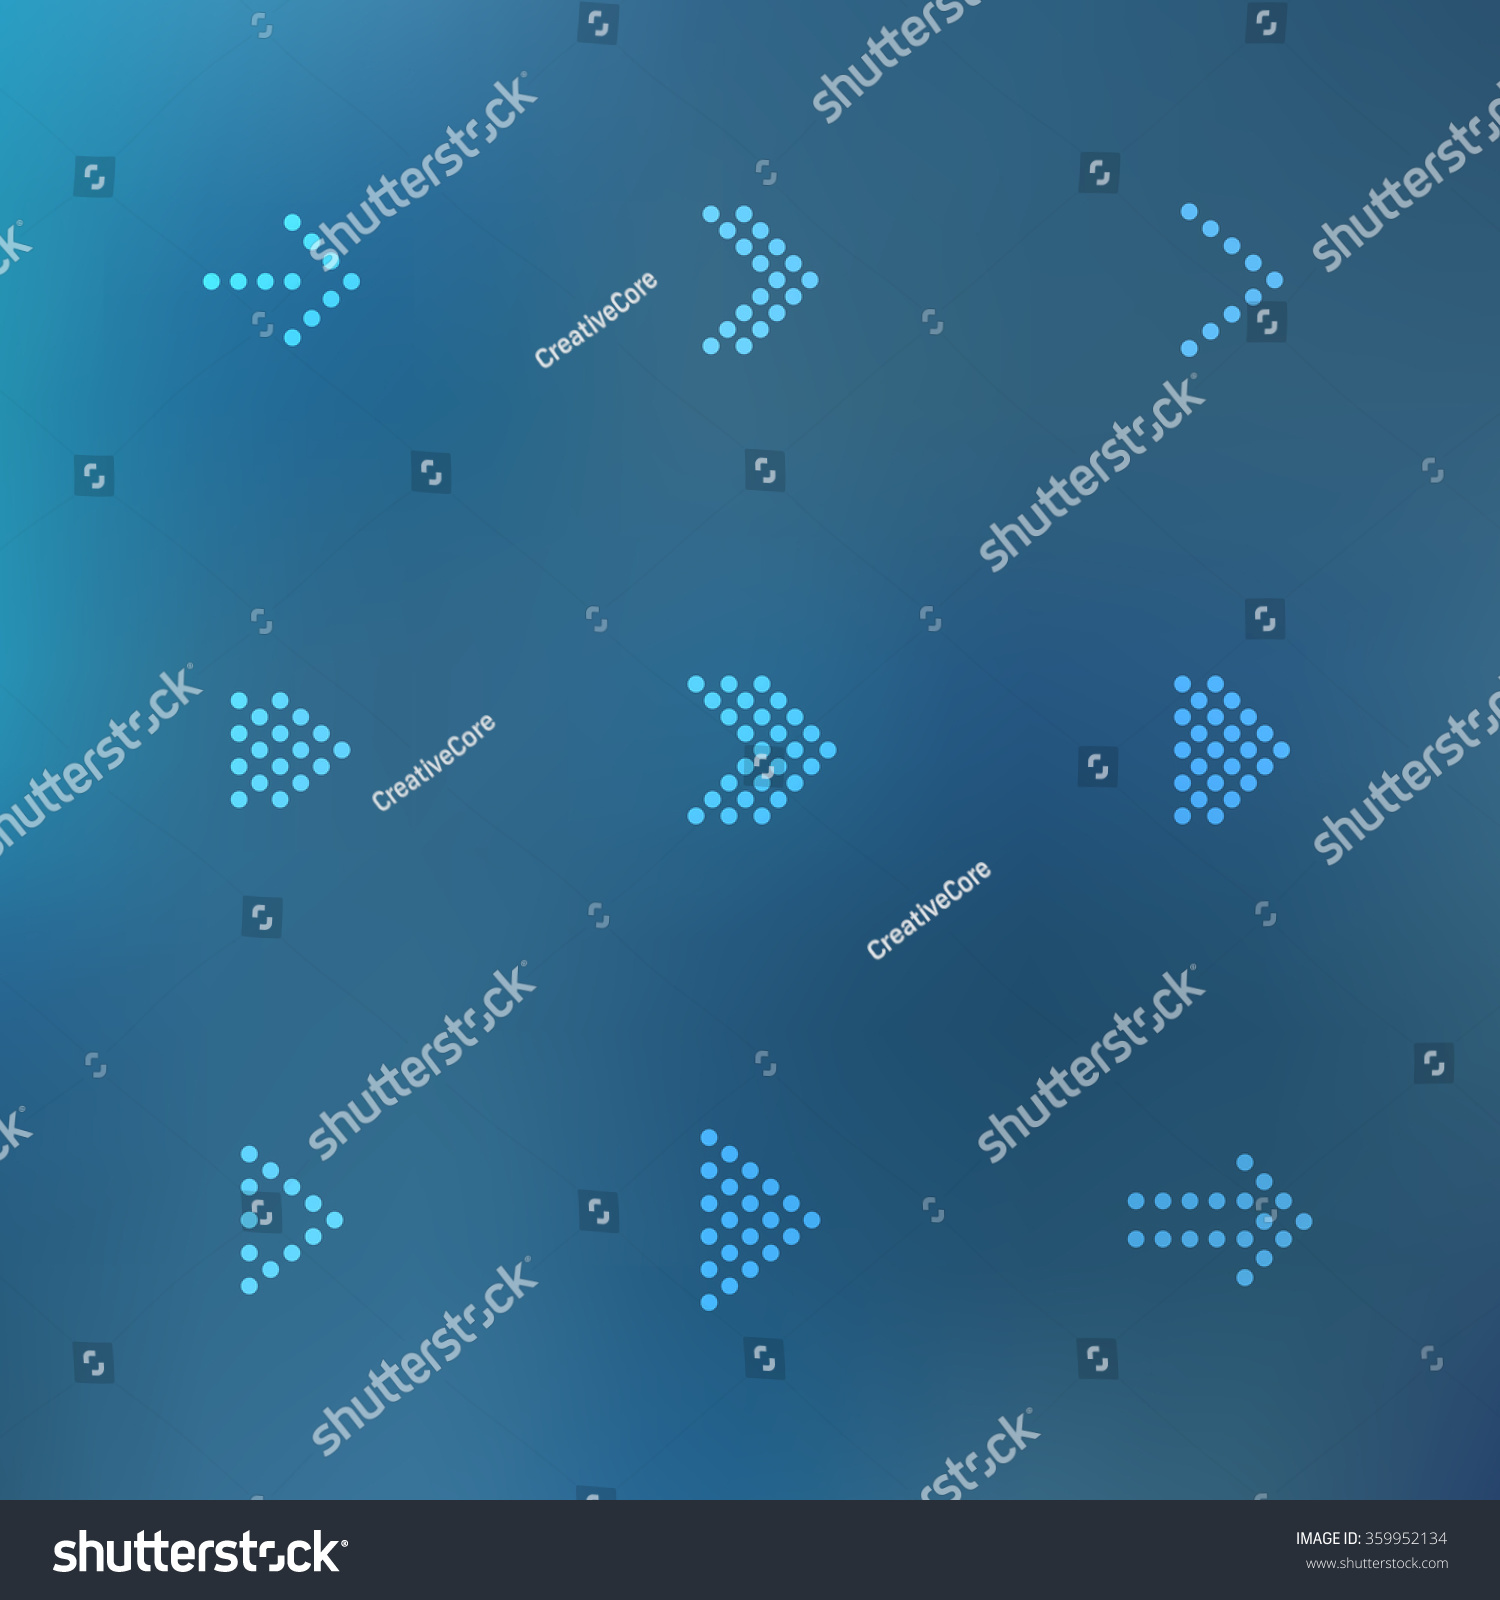 SVG of Beautiful Digital Dotted Vector Arrow Icons Set on Blurred Mesh Background. Ideal for your Web Site, Mobile UI, Banner, and other things. EPS 10 svg